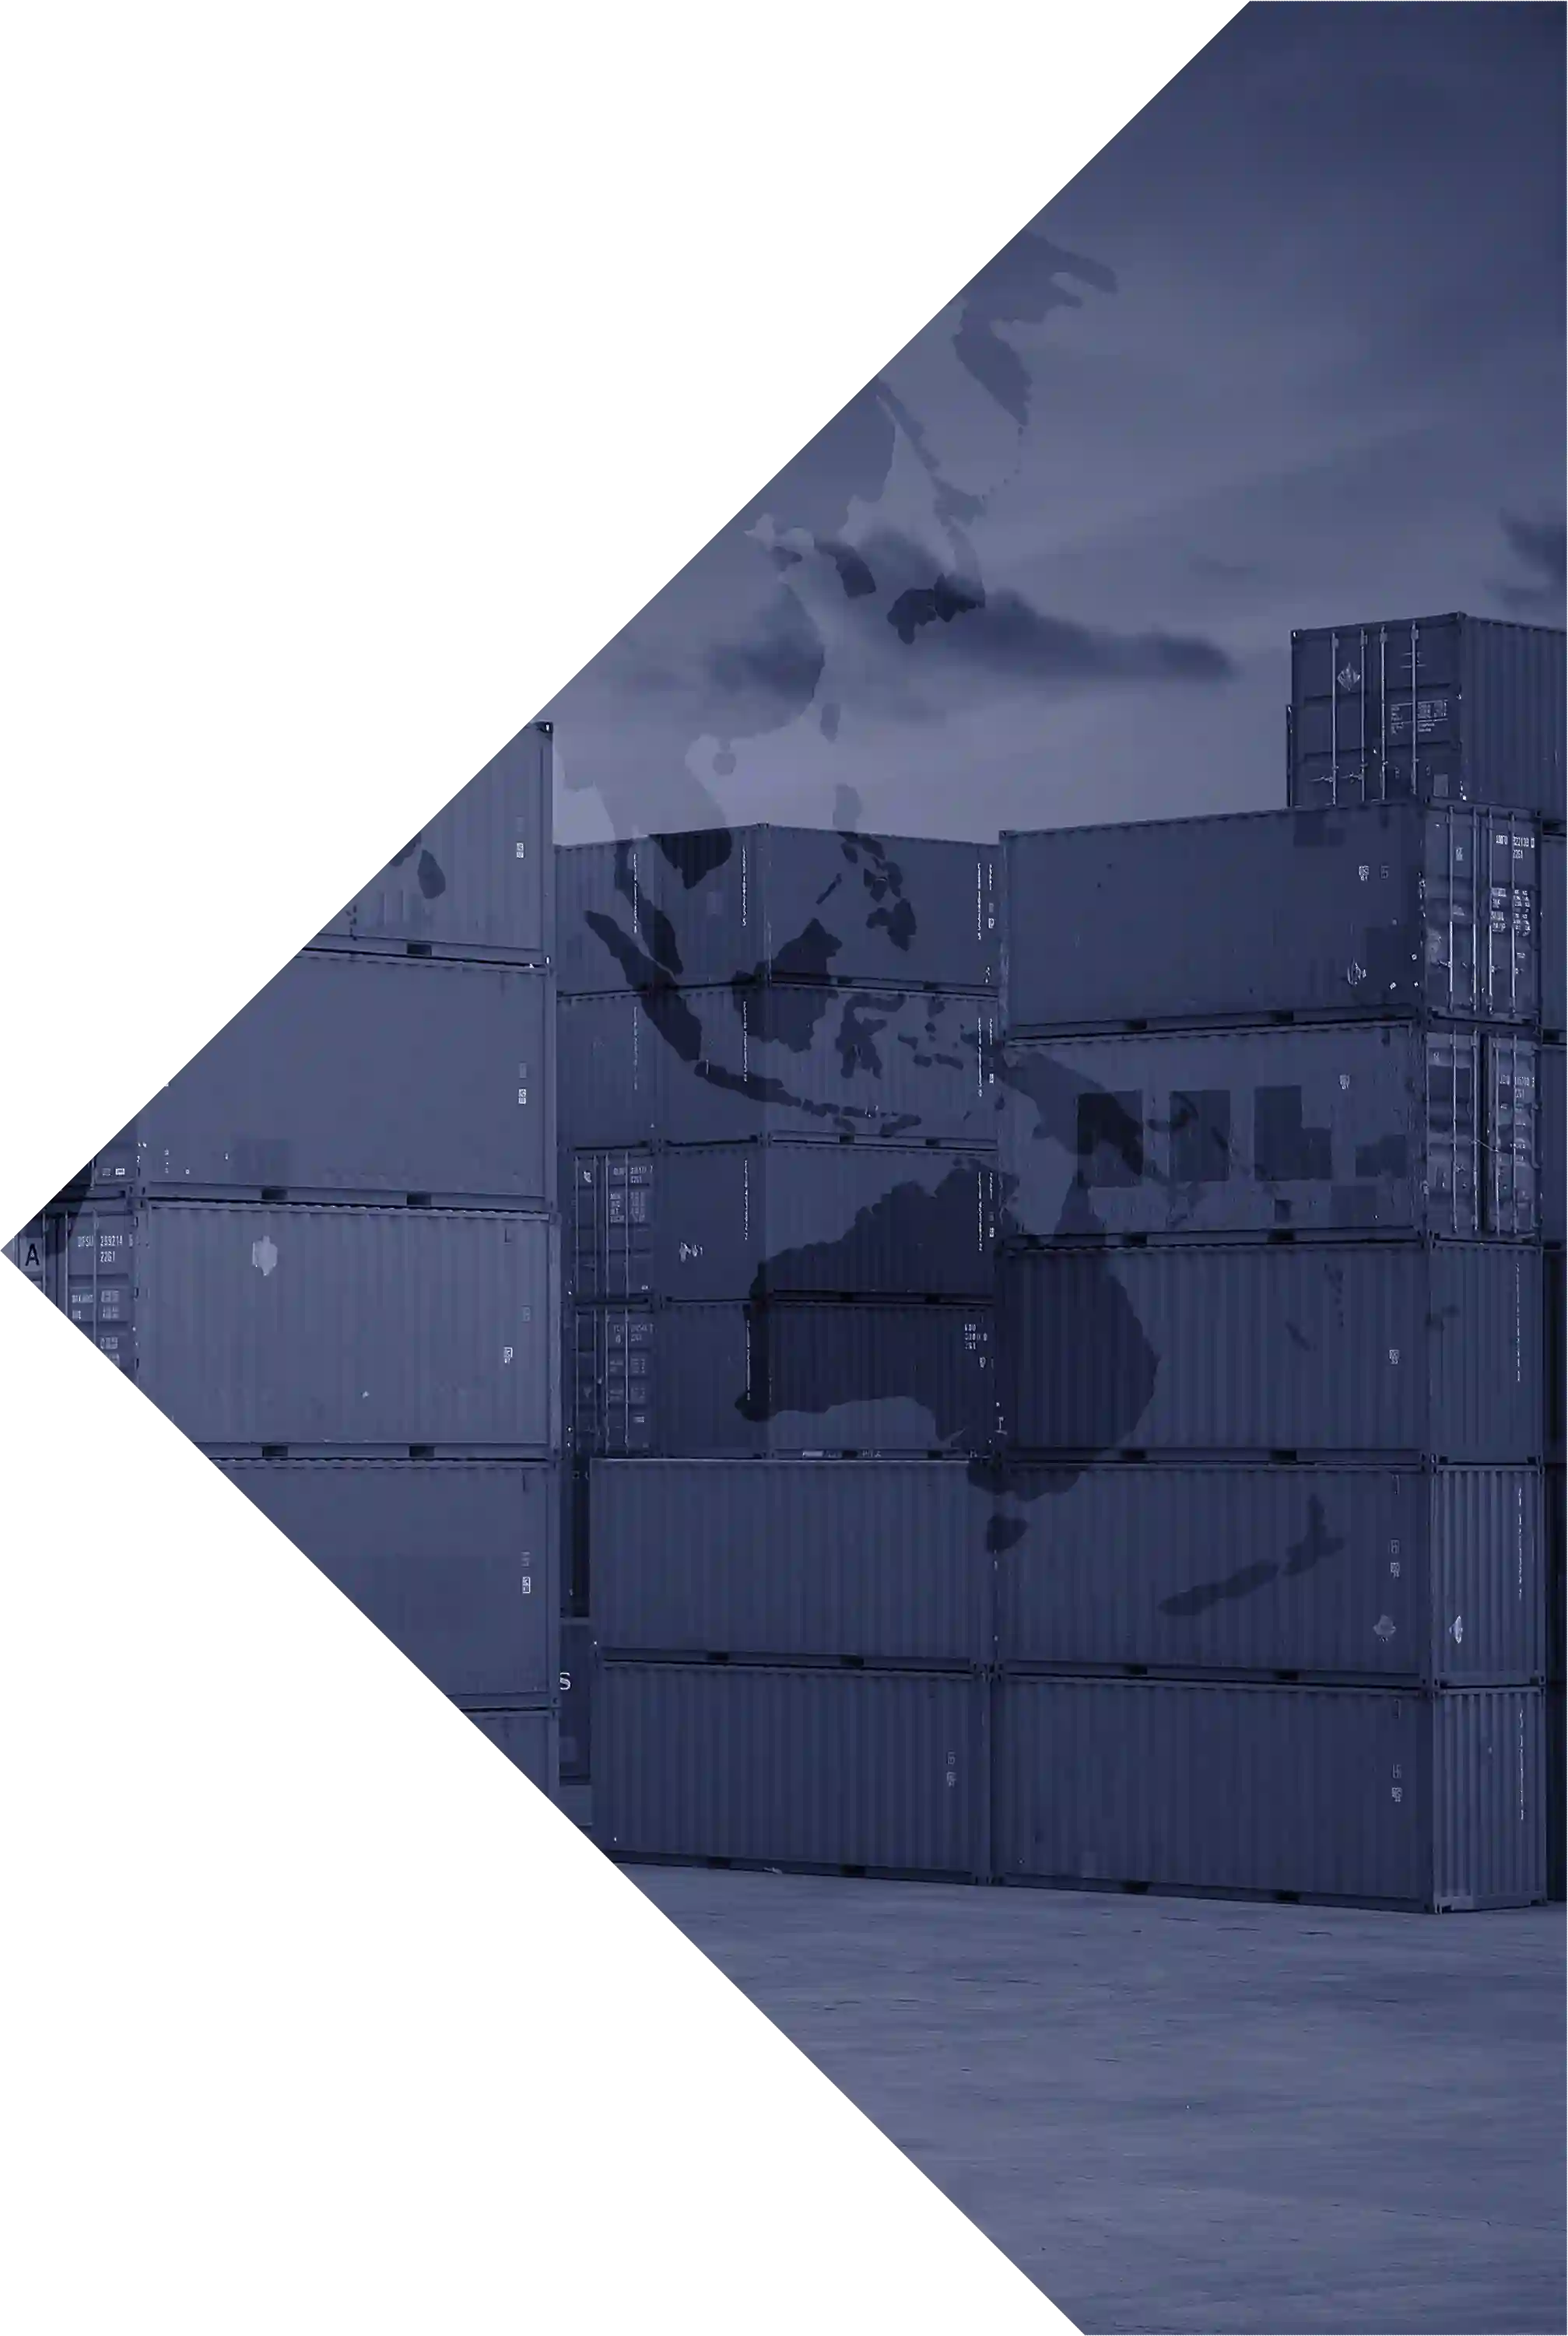 a graphic of the logo of australia superimposed over a next of sea containers at a wharf